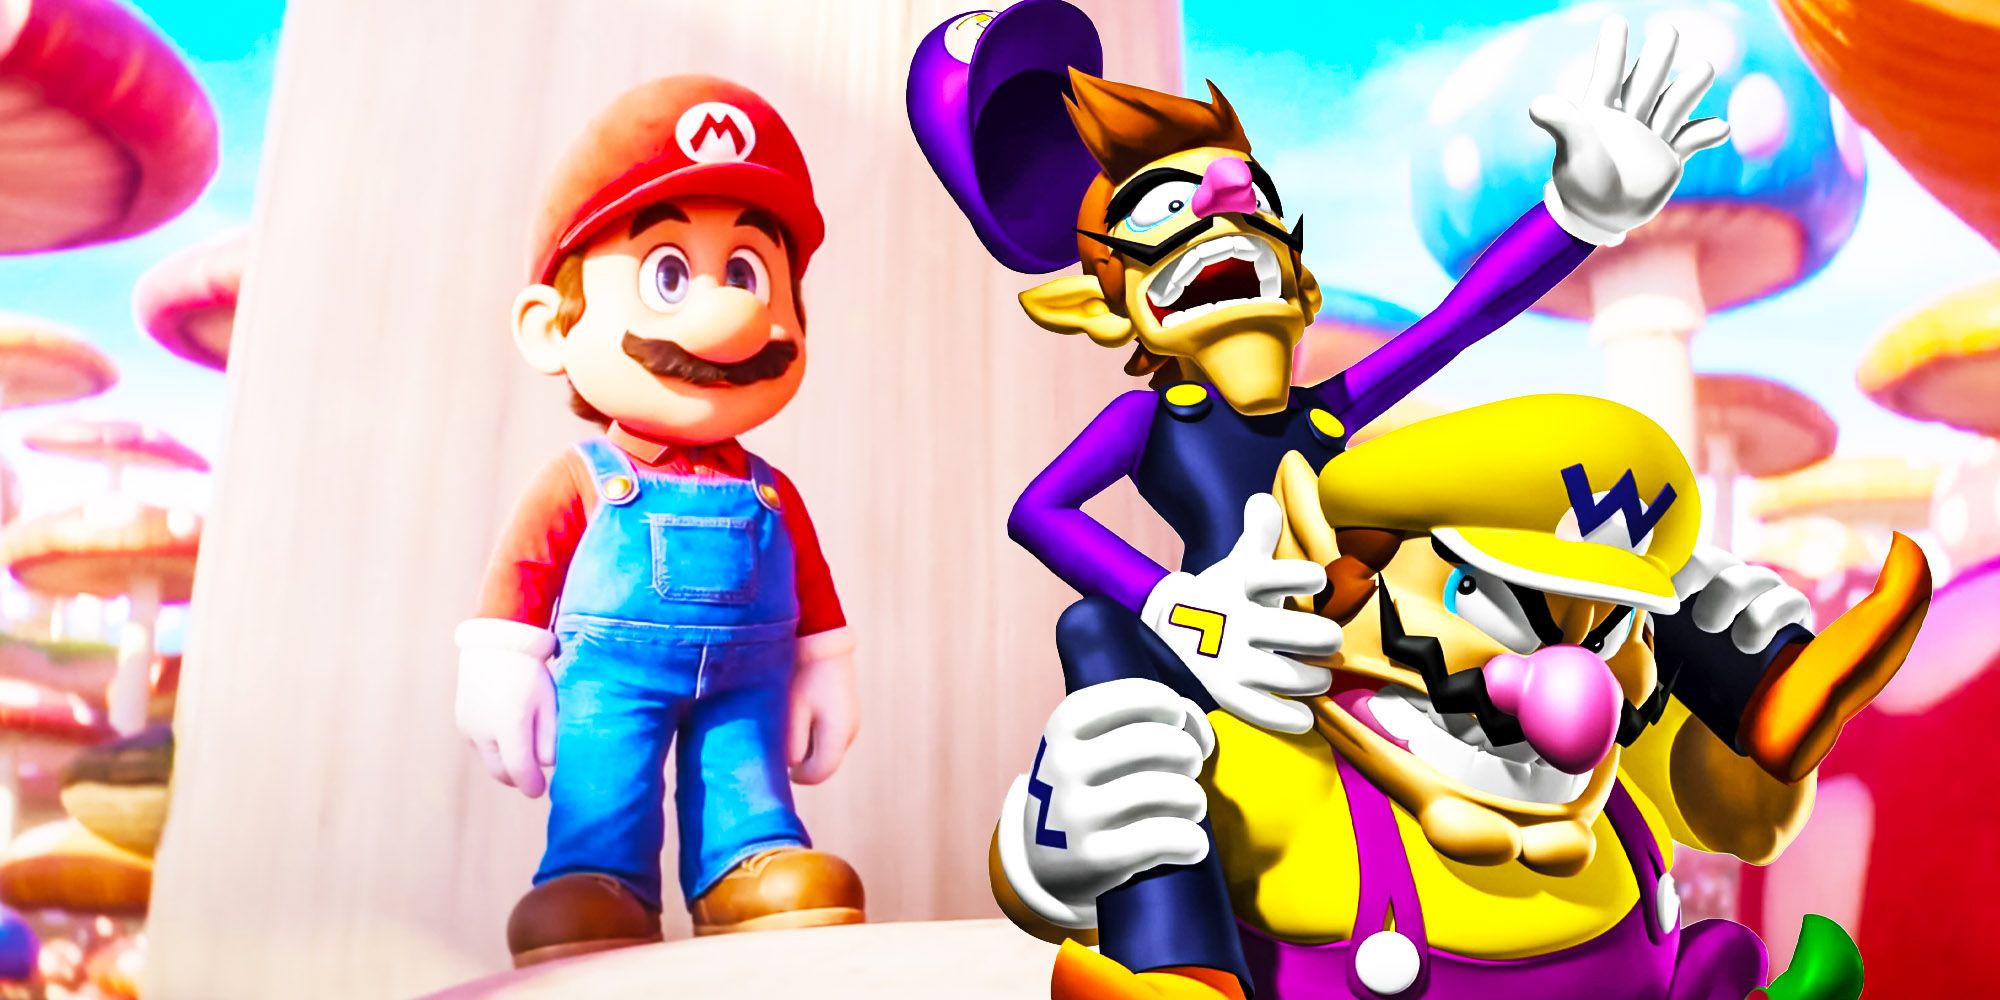 Wario & Waluigi May Be Missing From The Mario Movie (& That's Good)